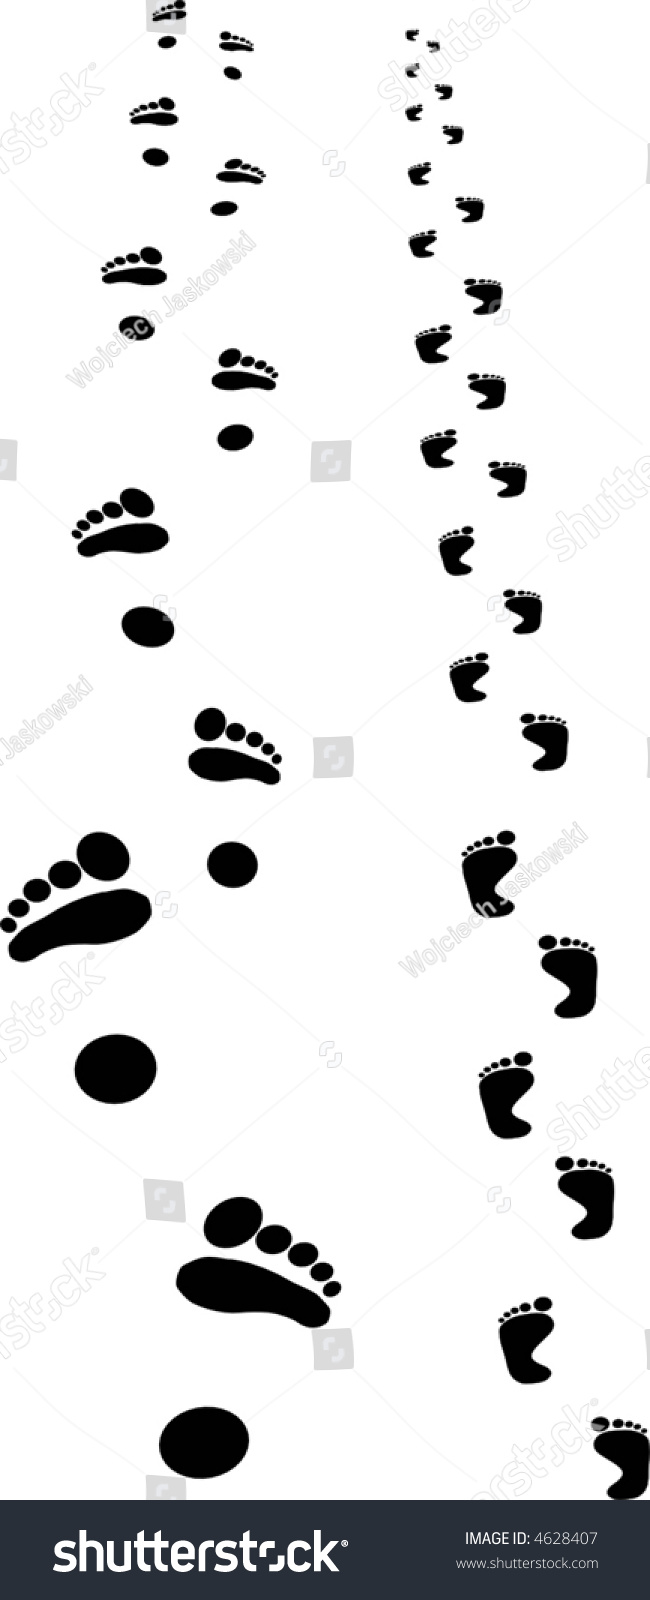 Black Footprints Silhouette Isolated On White Background Stock Vector ...